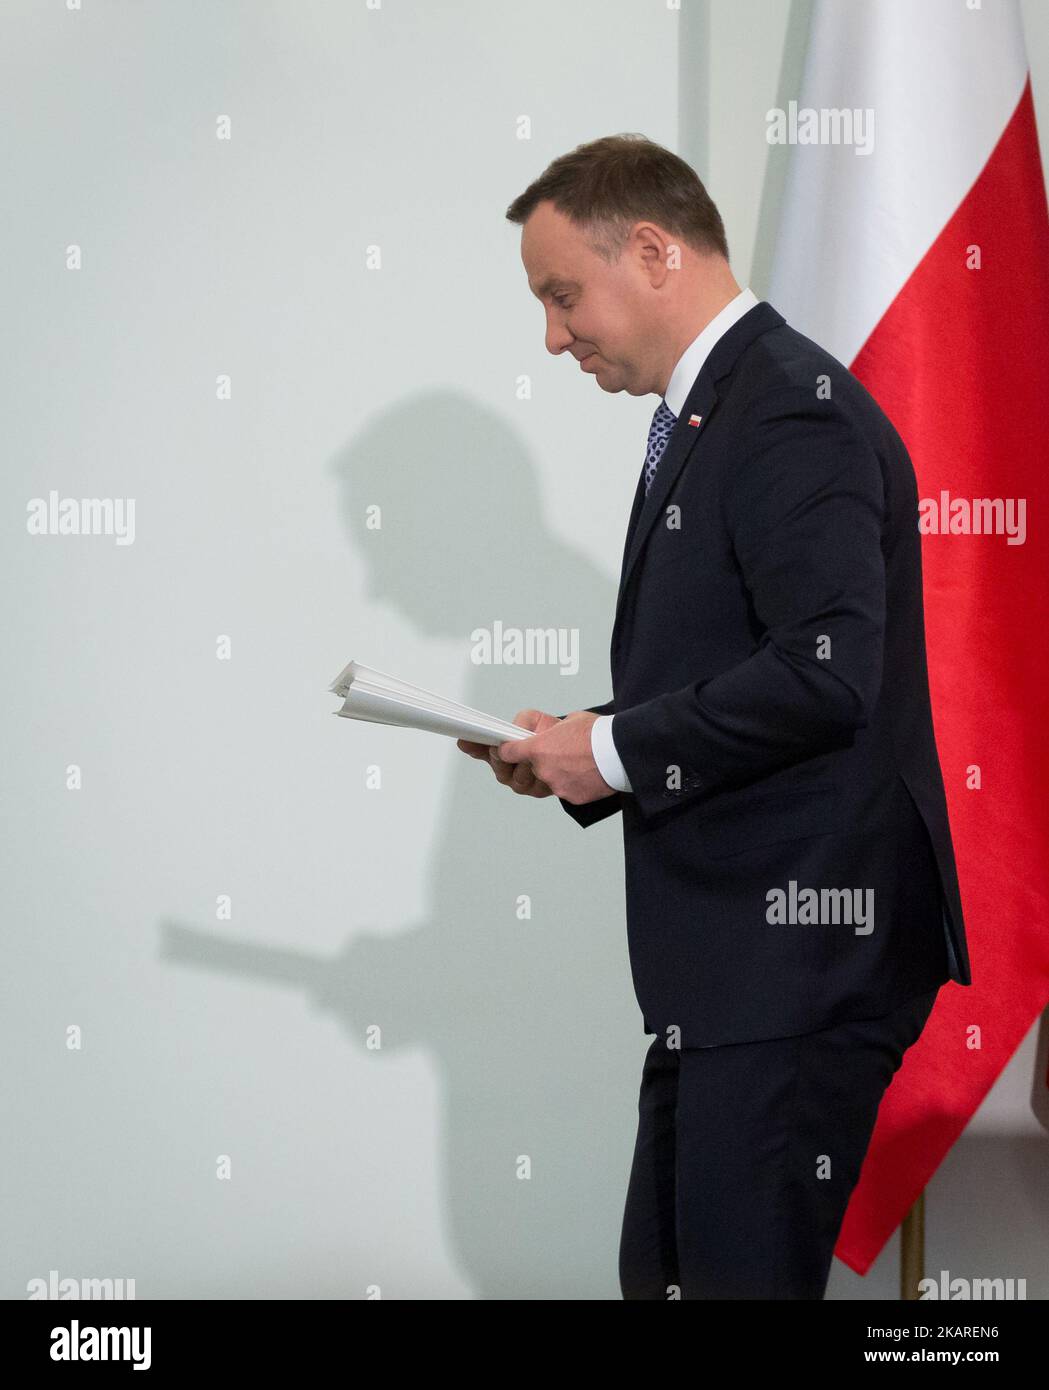 President of Poland Andrzej Duda during the press conference about Polish judicary system reforms at Presidential Palace in Warsaw, Poland on 25 September 2017. President Duda presented his draft legislation to reform the Supreme Court (SN) and the National Council of Judiciary (KRS). In July 2017, Duda vetoed Supreme Court and National Judiciary Council bills voted by the Polish Sejm's majority. Large protests have been held across Poland over rules passed 20 July by the ruling party that would limit the independence of the judiciary. (Photo by Mateusz Wlodarczyk/NurPhoto) Stock Photo